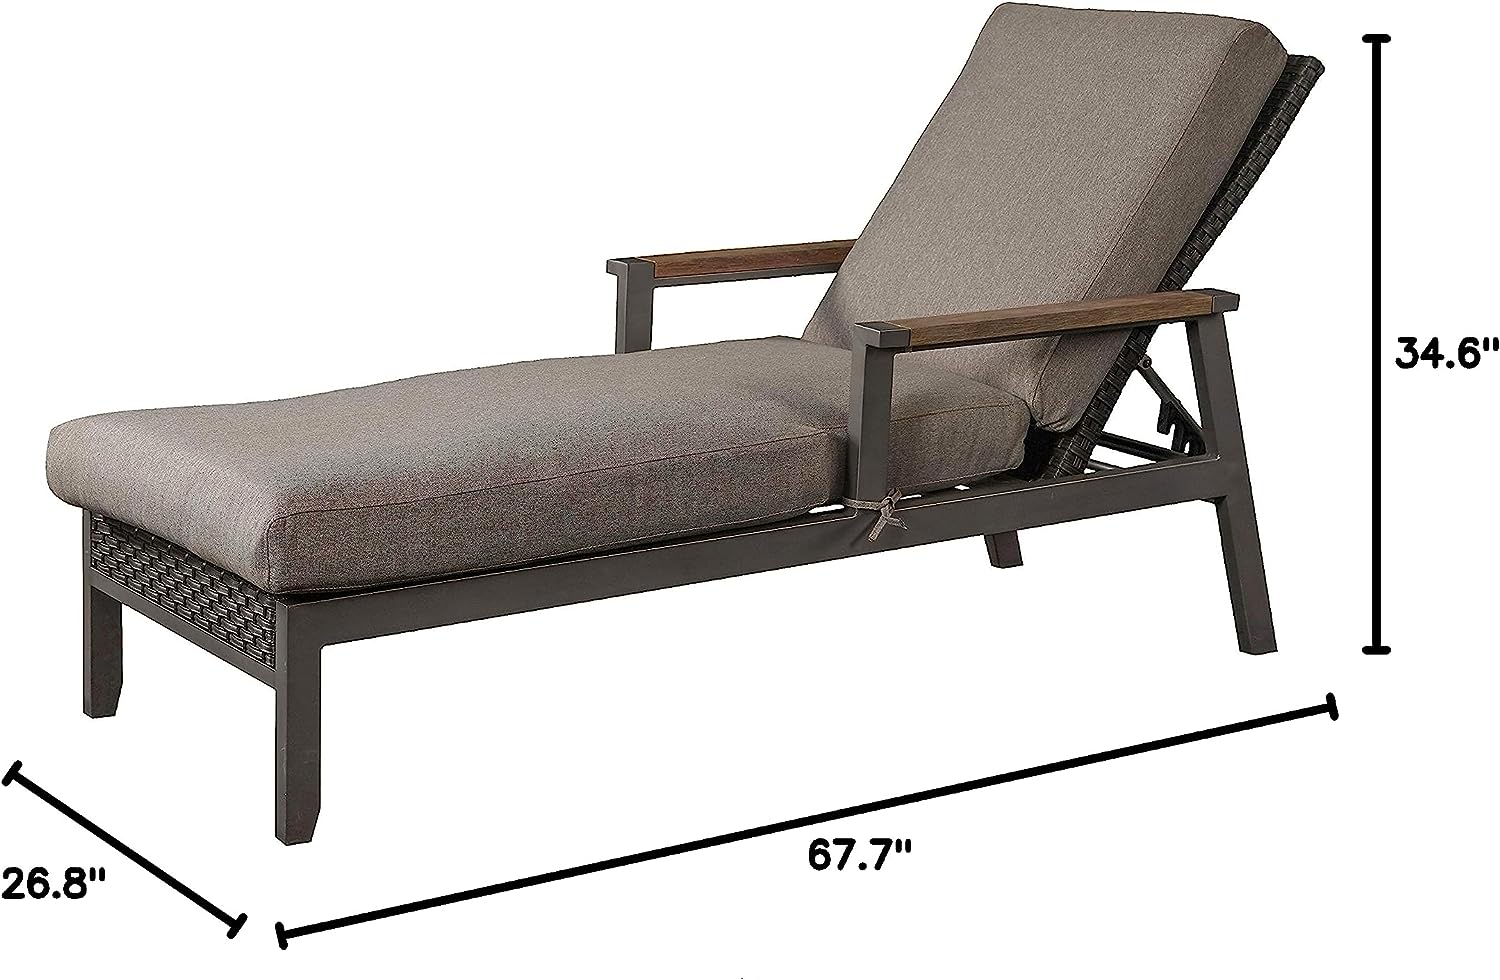 Festival Depot 2 Pieces Outdoor Patio Chaise Rattan Wicker Lounge Chair with Adjustable Back and Removable Cushions for Poolside Backyard Lawn, Dark Grey